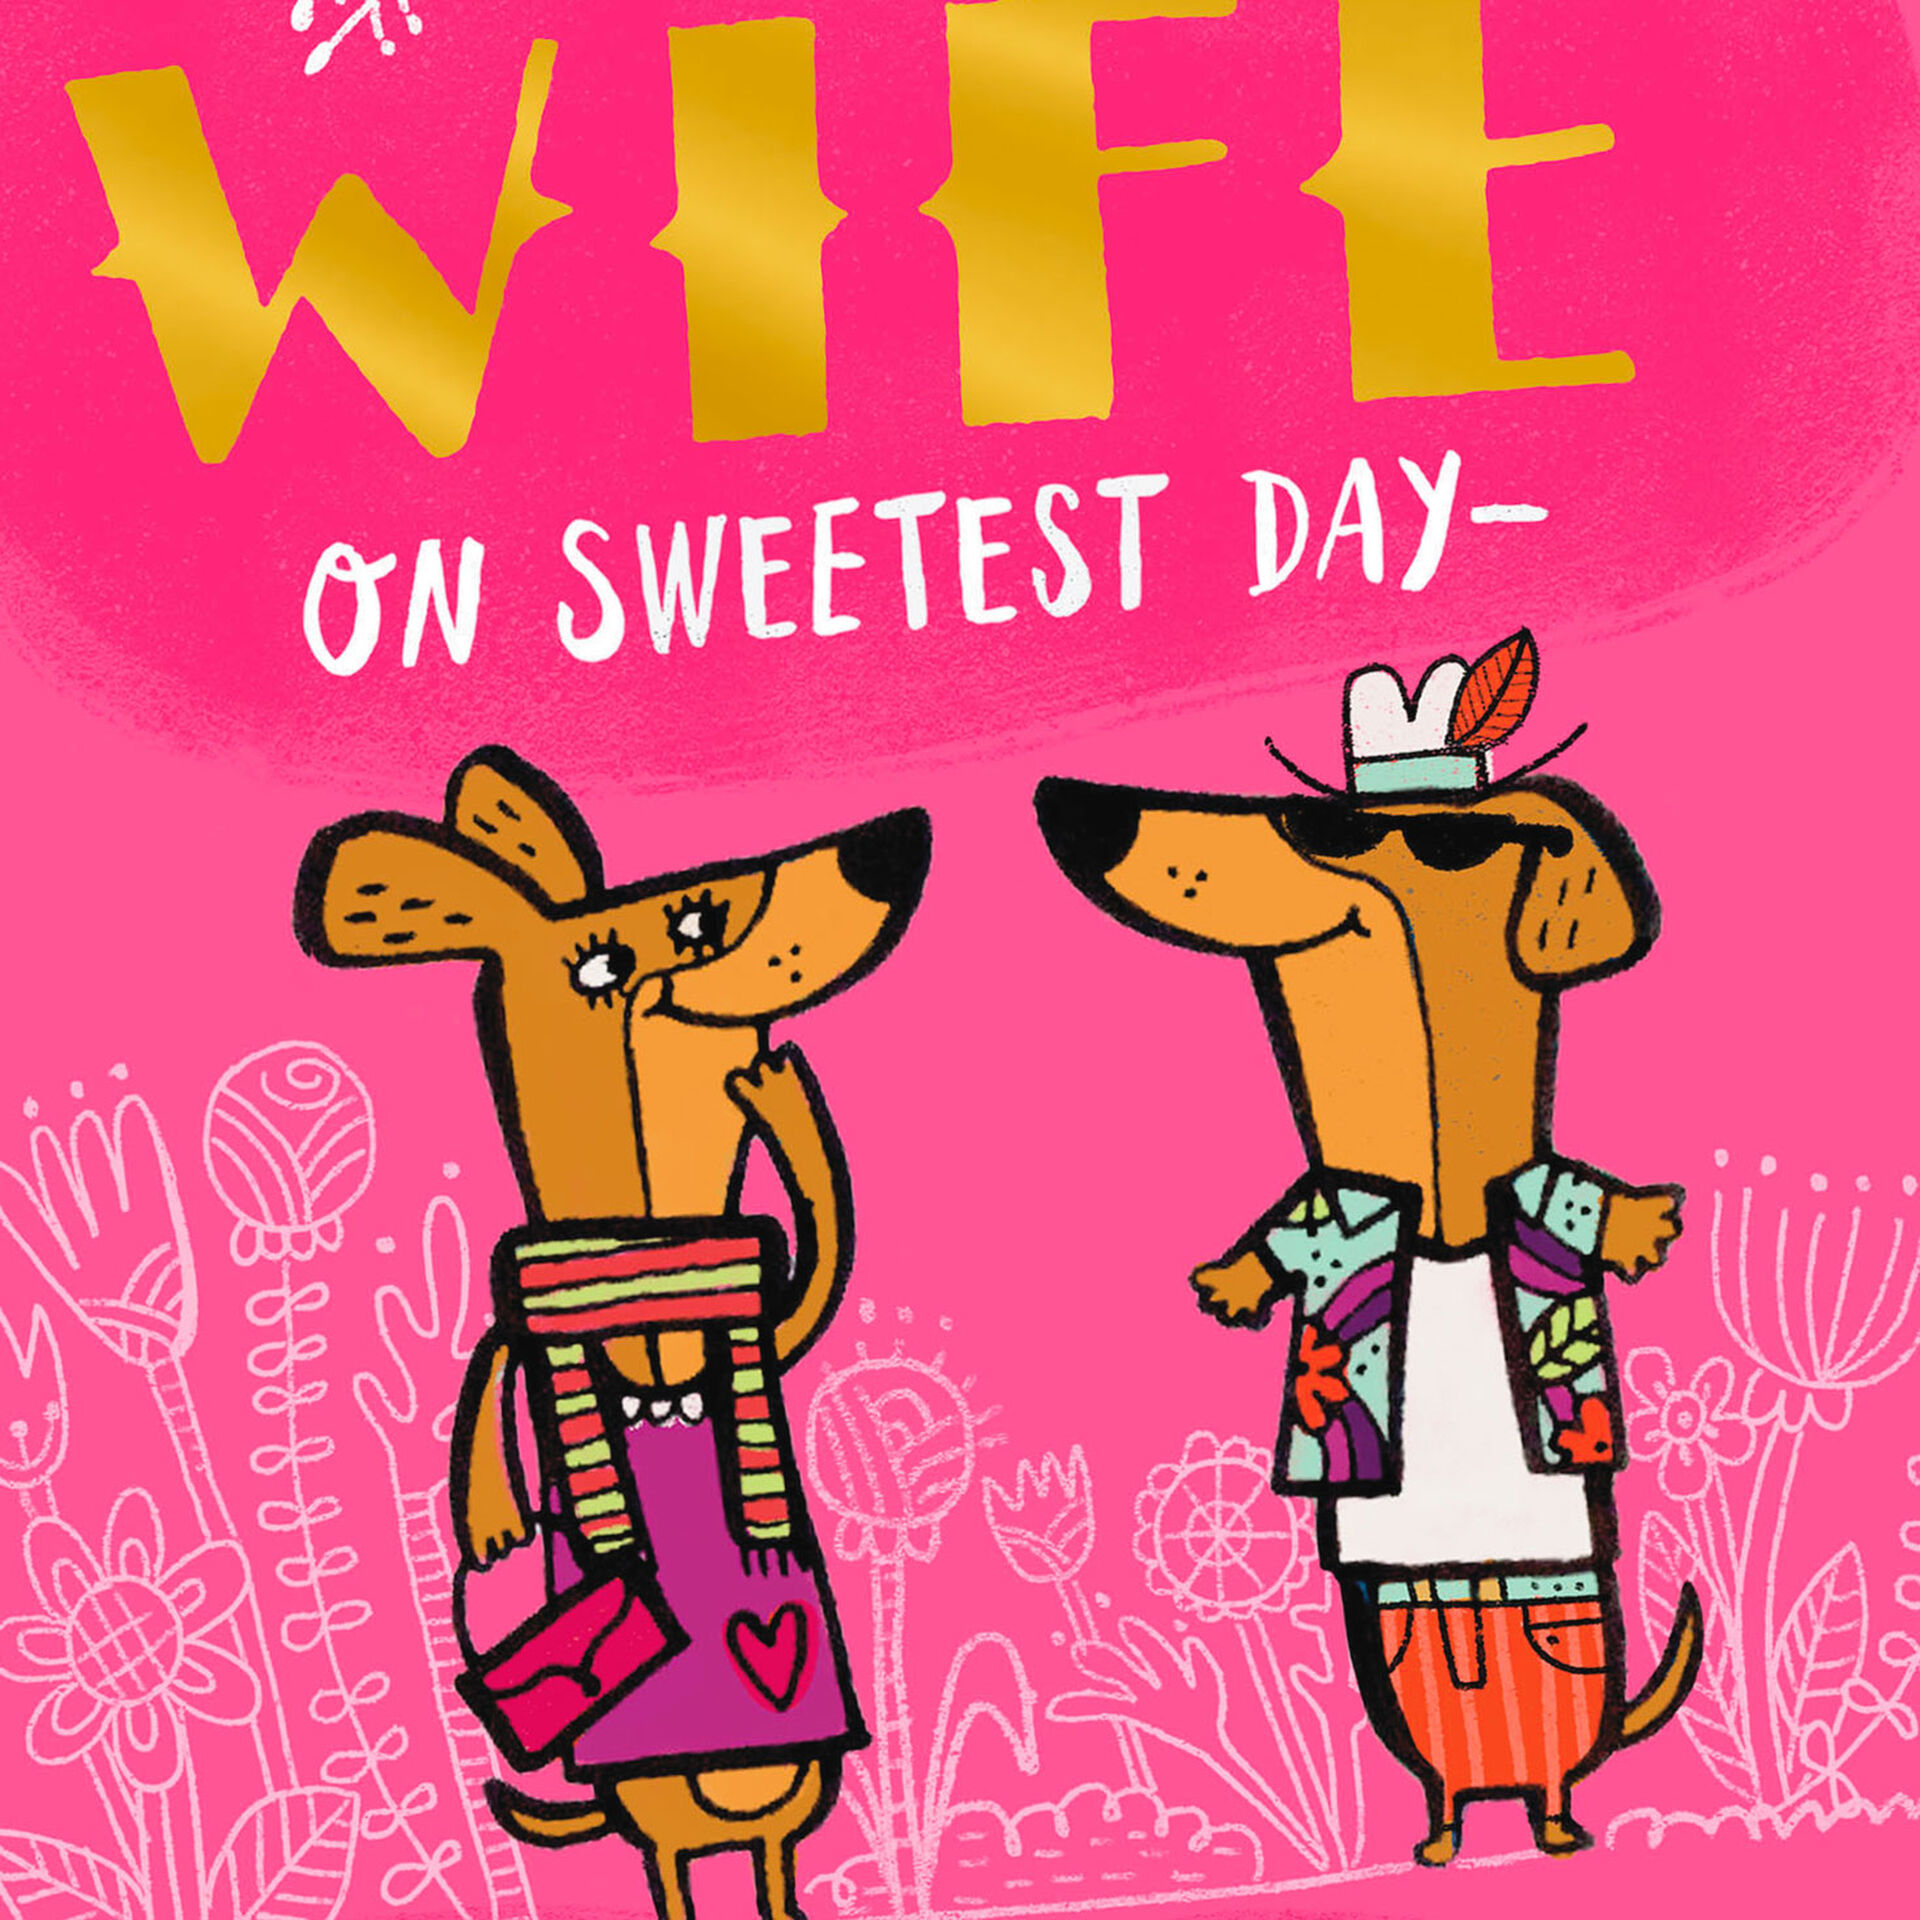 i-m-a-guy-with-great-taste-funny-sweetest-day-card-for-wife-greeting